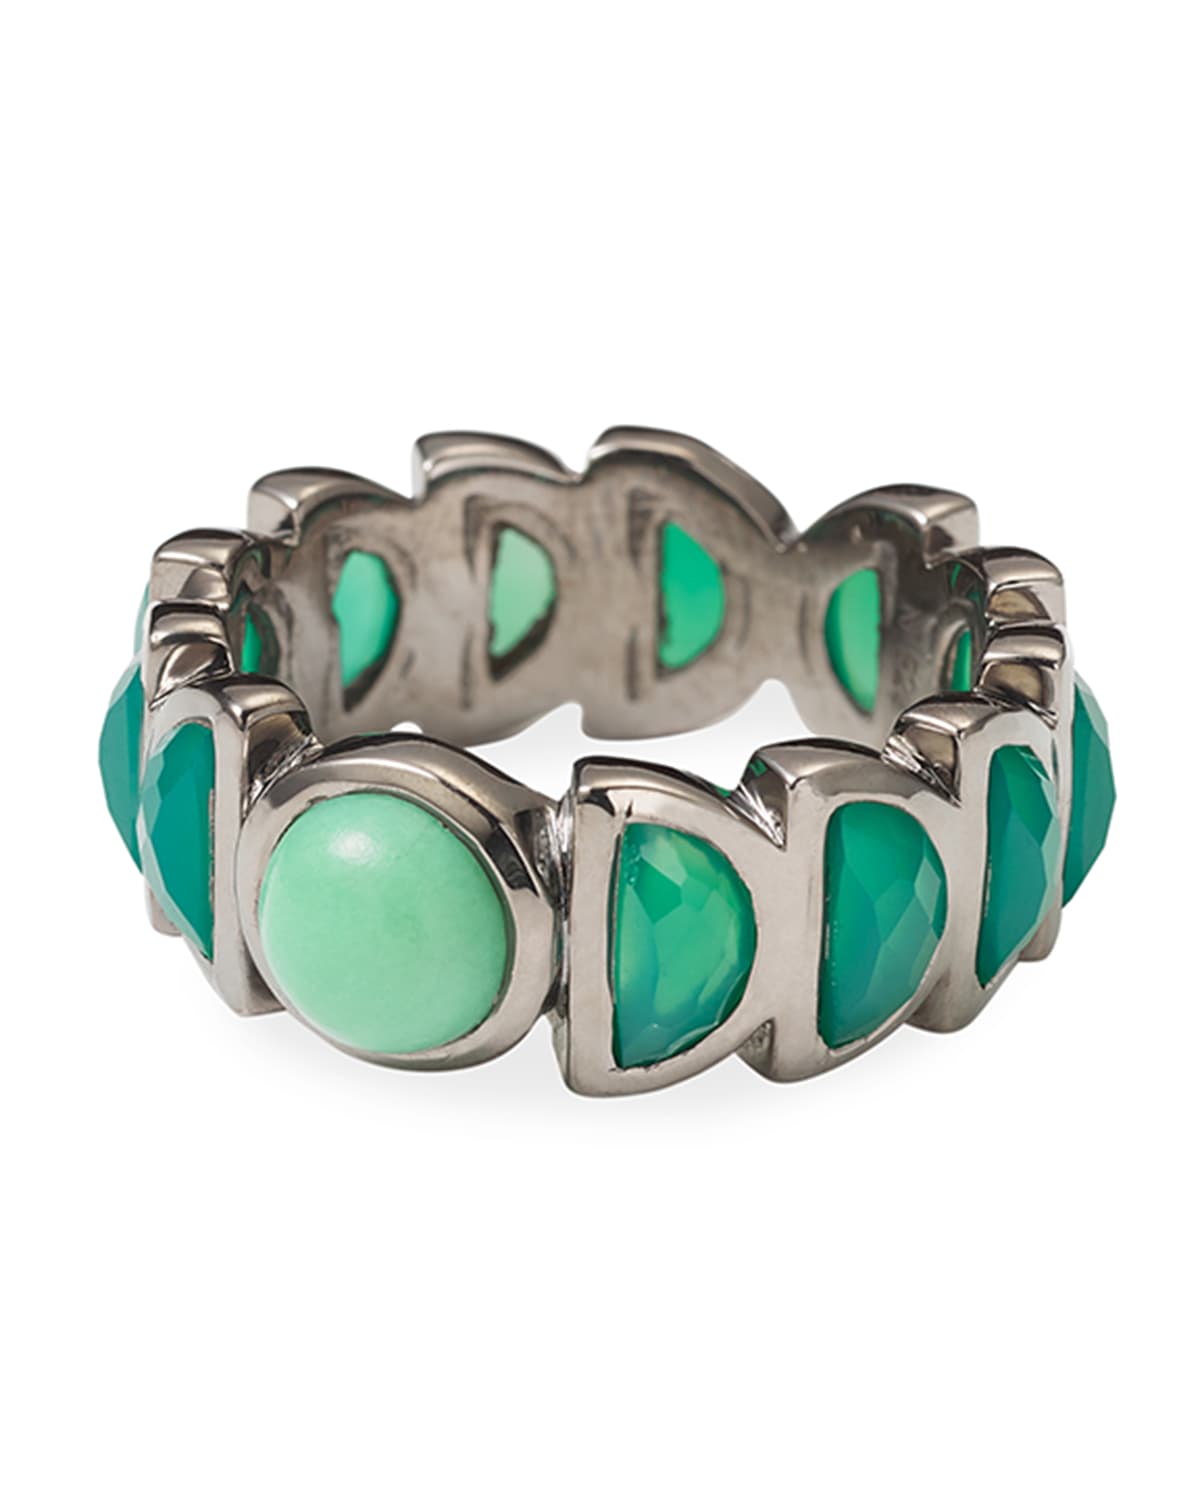 Luna Band Ring with Green Onyx, Size 6.5